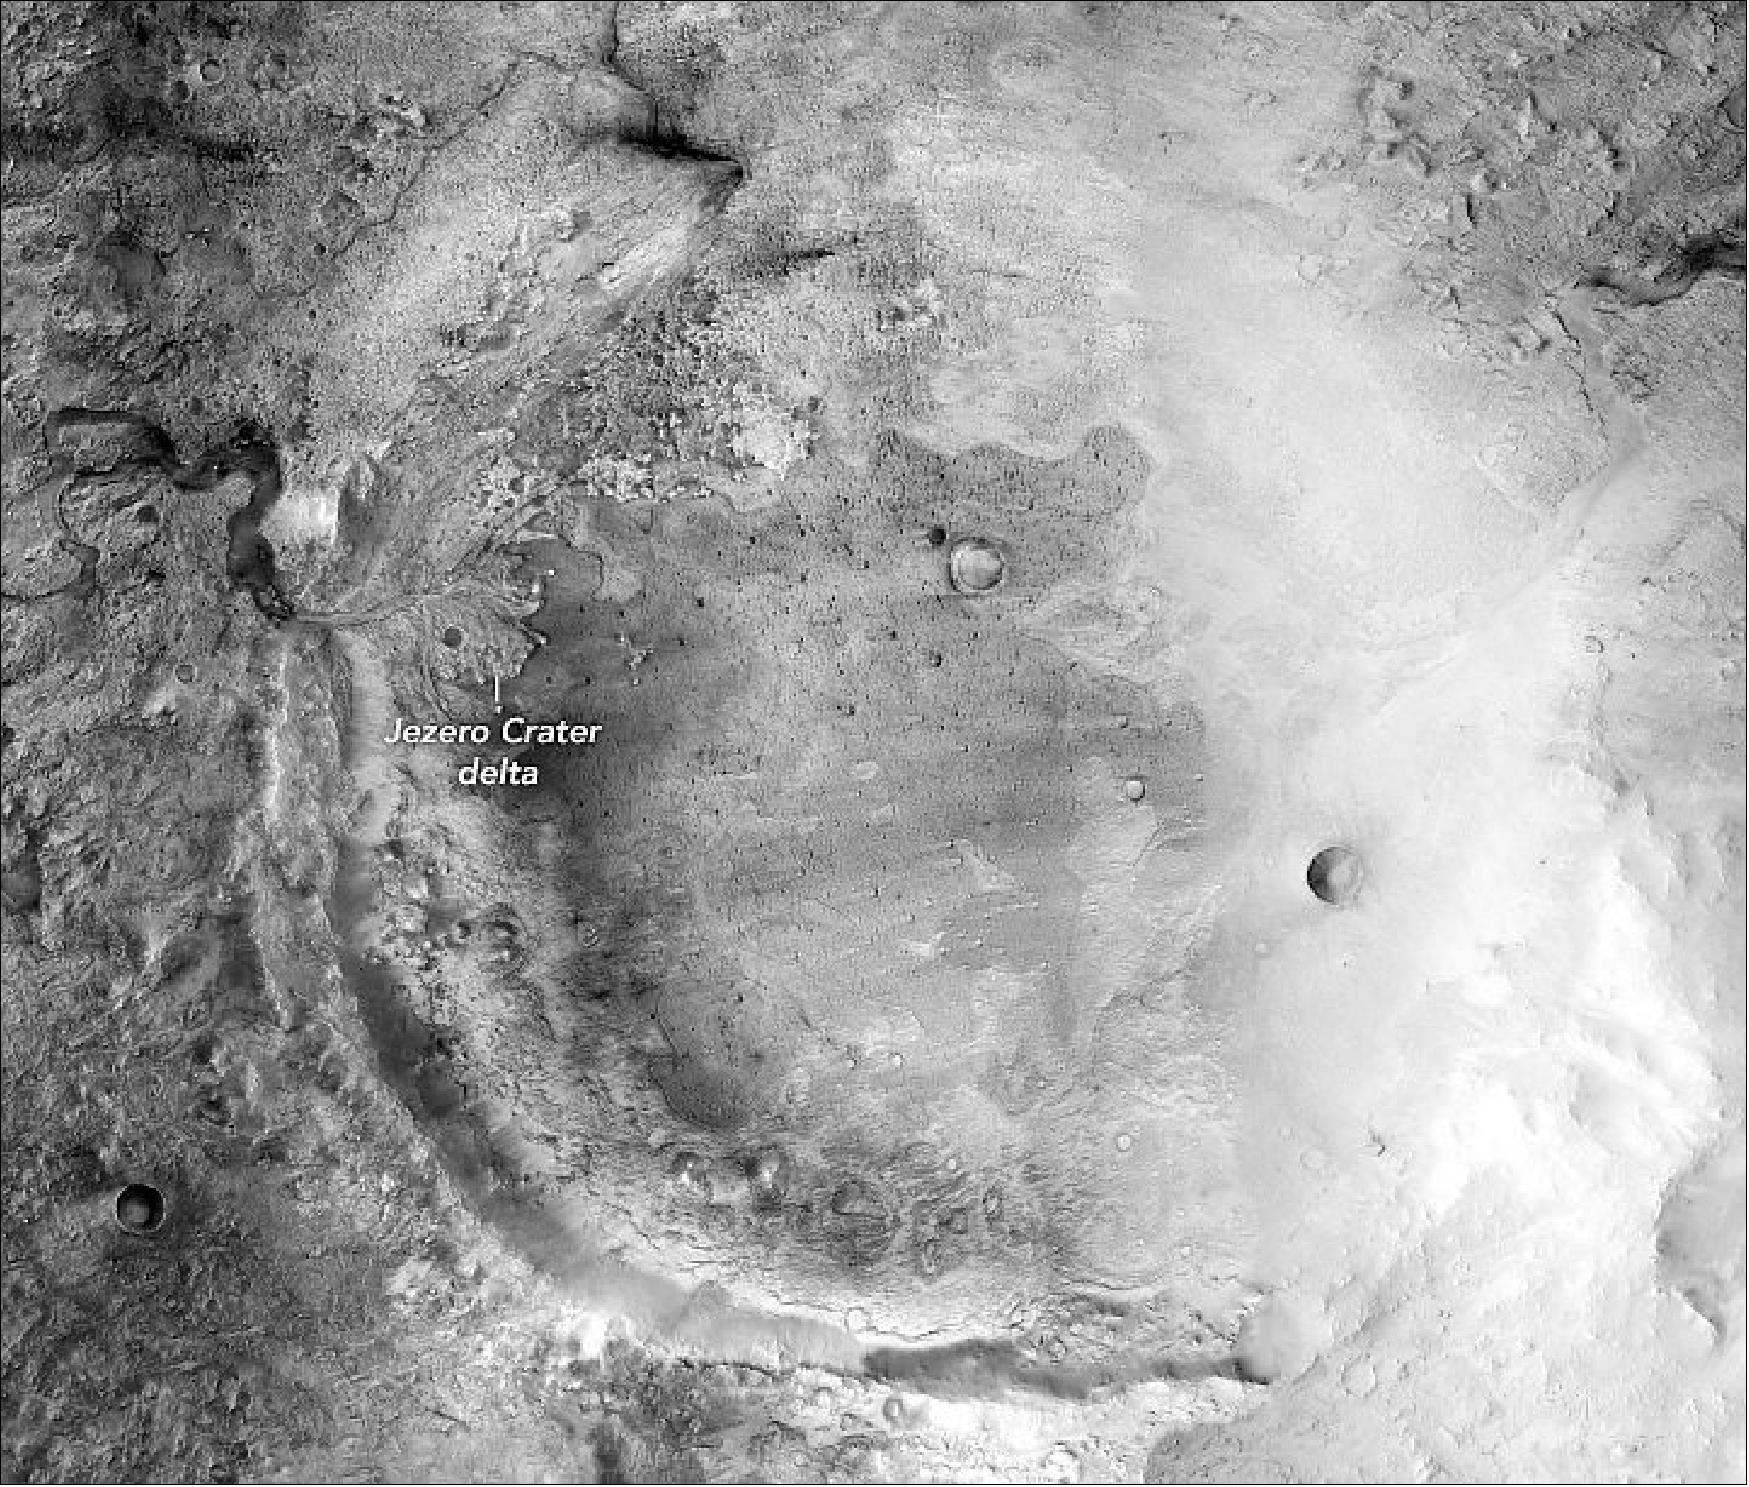 Figure 59: This image shows Jezero Crater as observed by MRO’s Context Camera. Spectral data showed signatures of carbonates on the western edge of the crater, which scientists believe to be the shoreline and beaches of an ancient lake. The carbonates are also present in the delta, which is the planned site of the Perseverance landing (image credit: Jezero Crater image courtesy of NASA / JPL-Caltech / MSSS / Tanya Harrison)